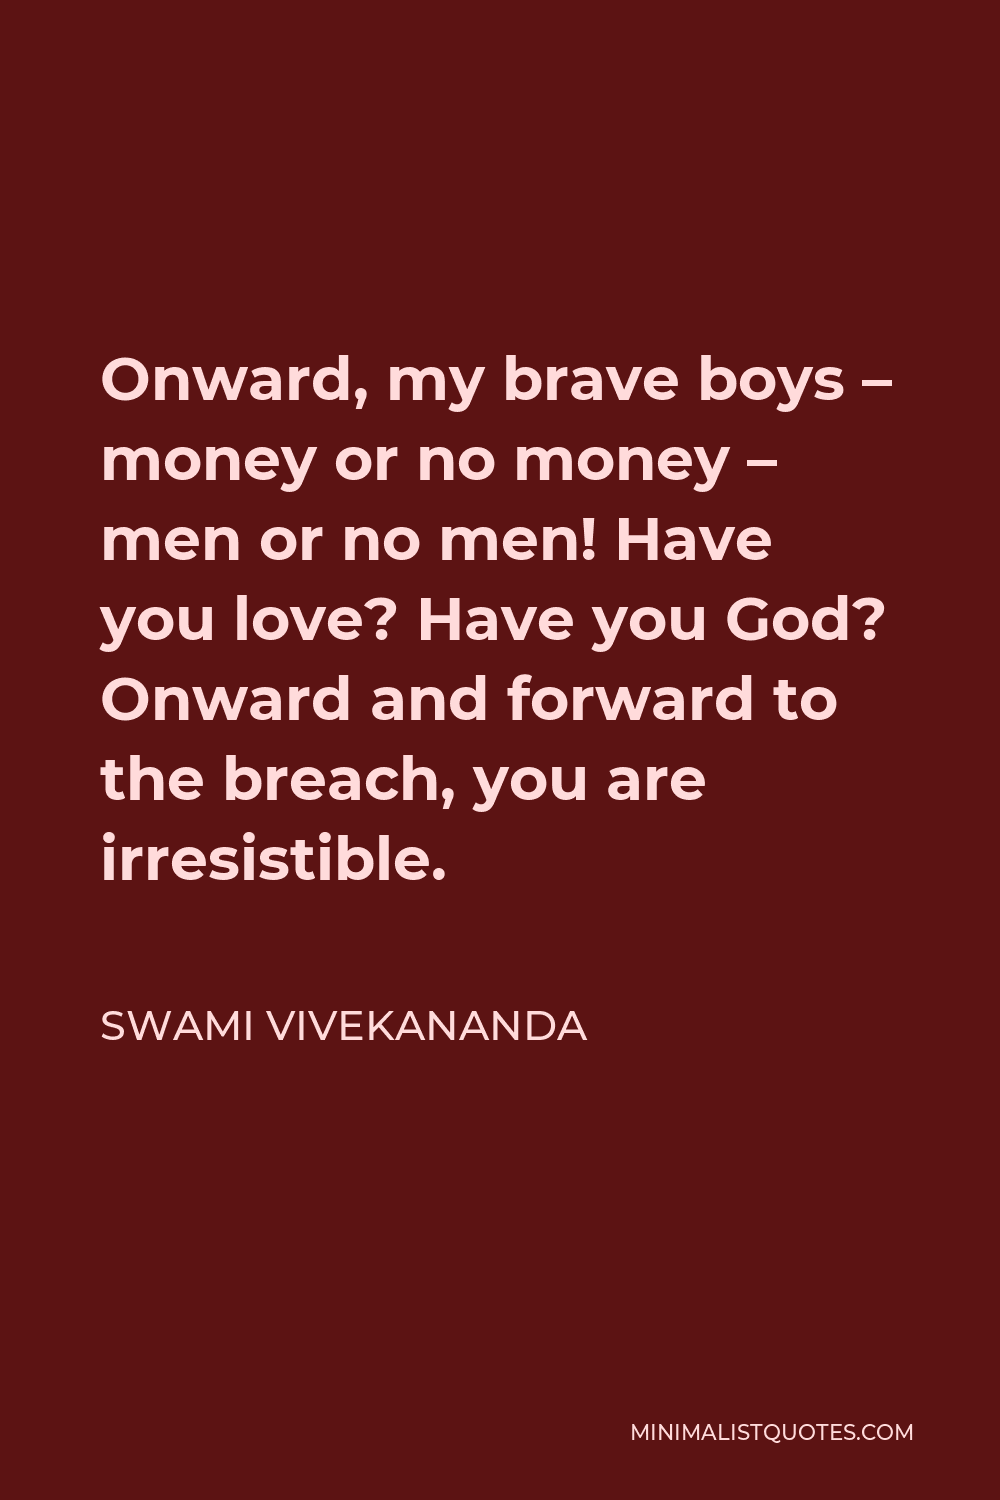 Swami Vivekananda Quote - Onward, my brave boys – money or no money – men or no men! Have you love? Have you God? Onward and forward to the breach, you are irresistible.